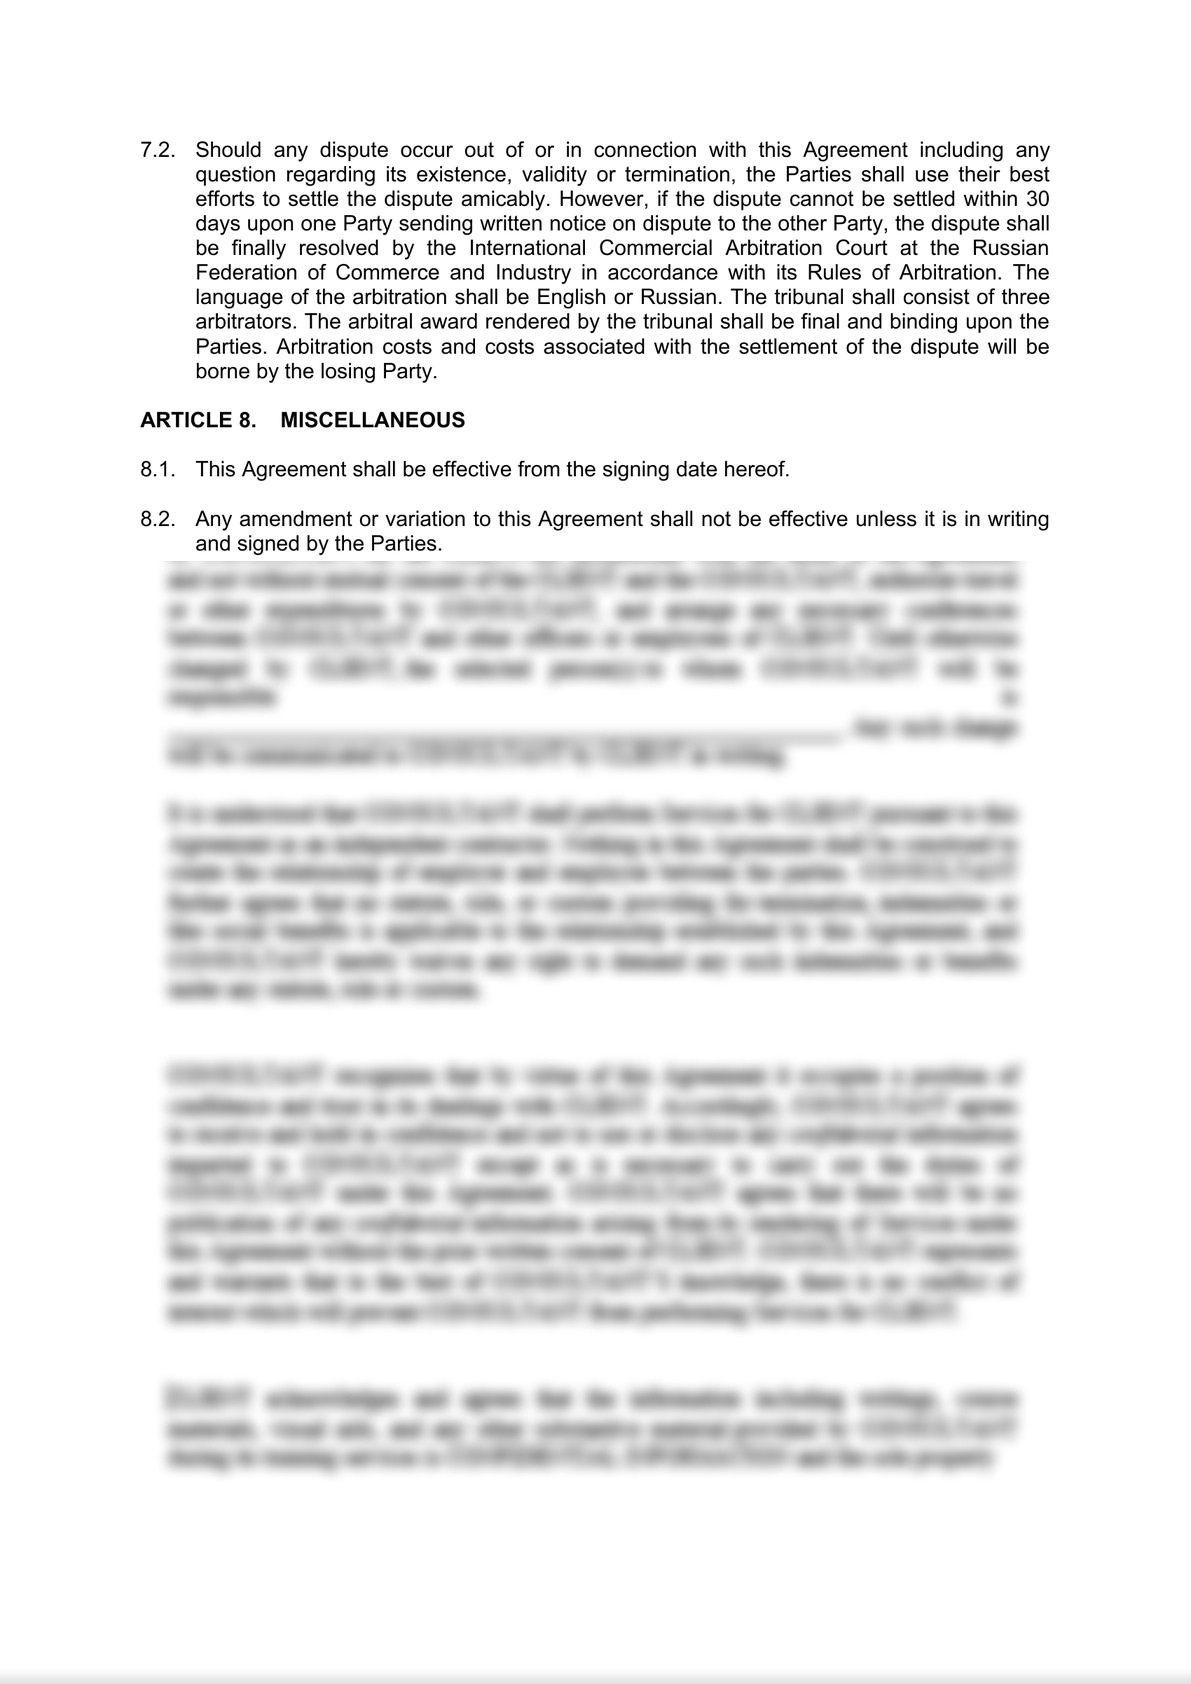 Share Purchase Agreement_Foreign Individual_English-3